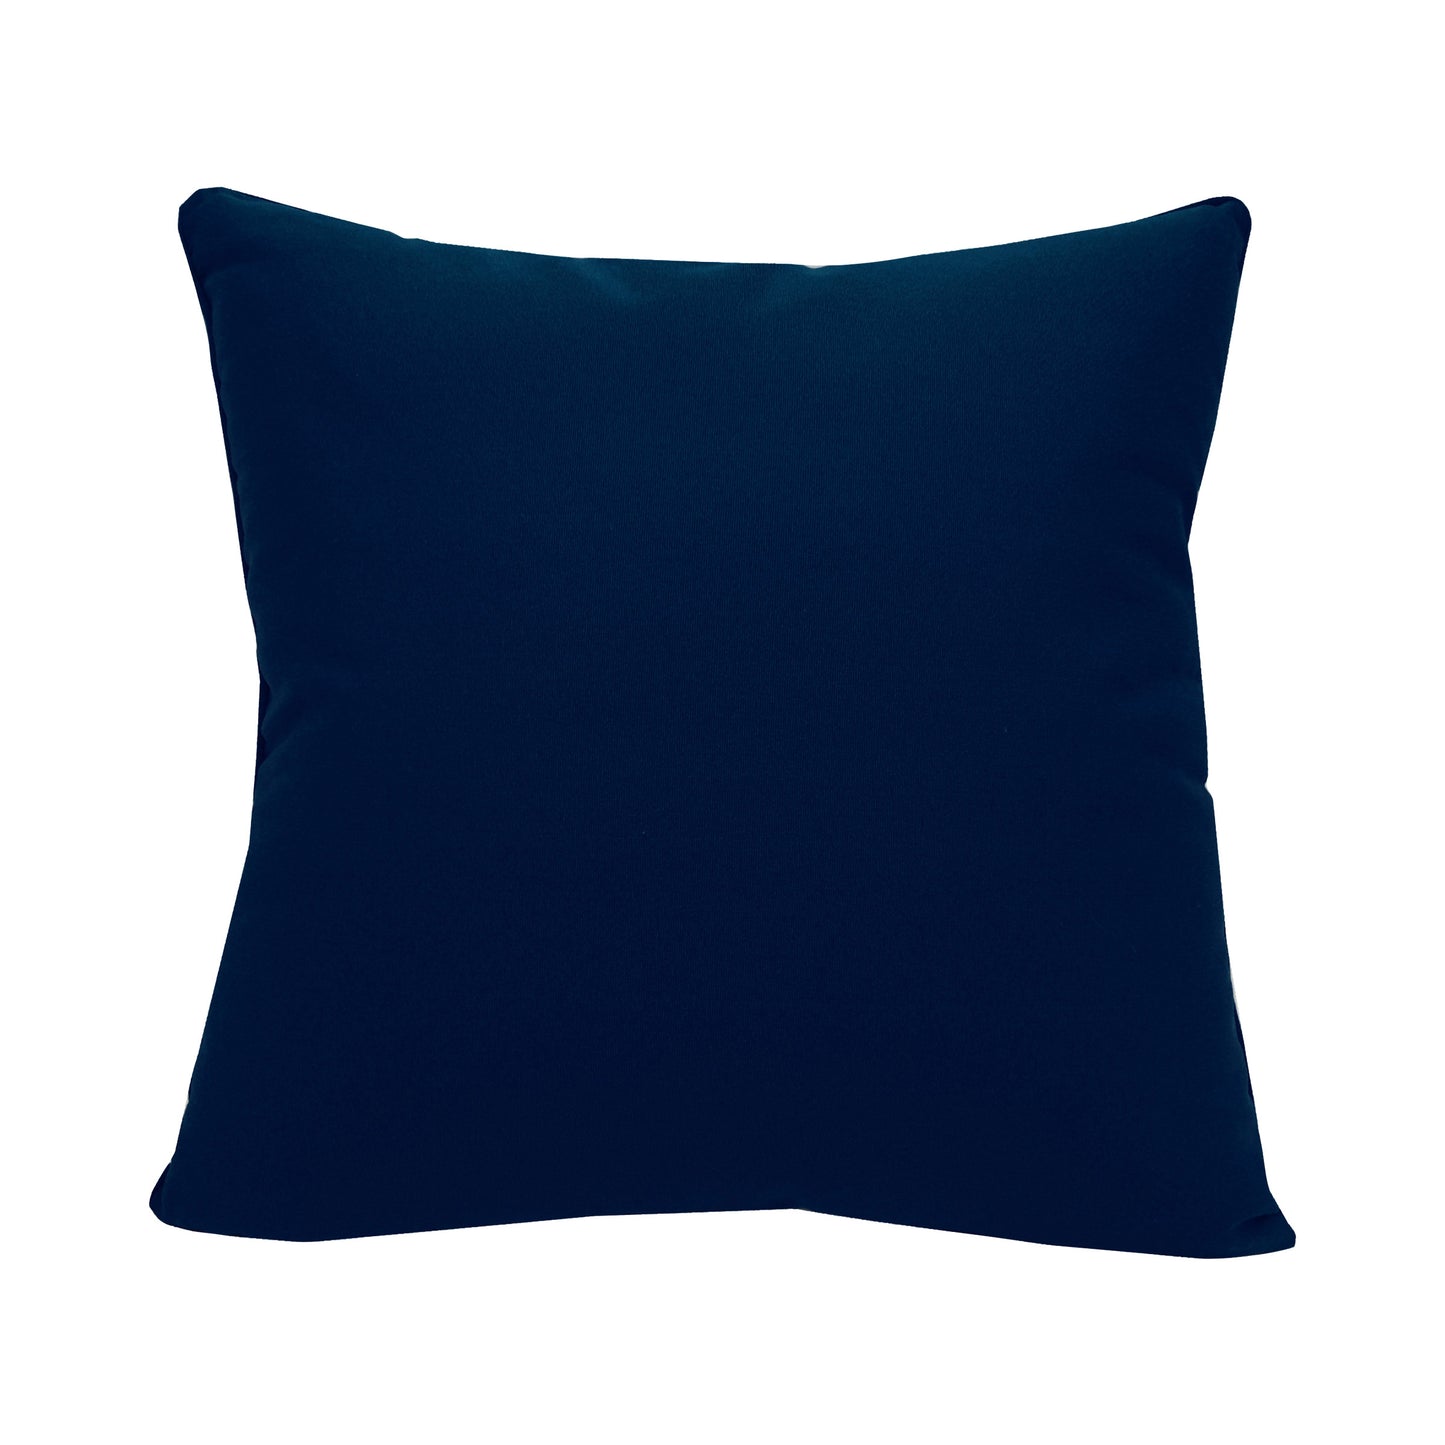 Solid navy fabric; the back side of the Navy Sunflower Indoor Outdoor Pillow.